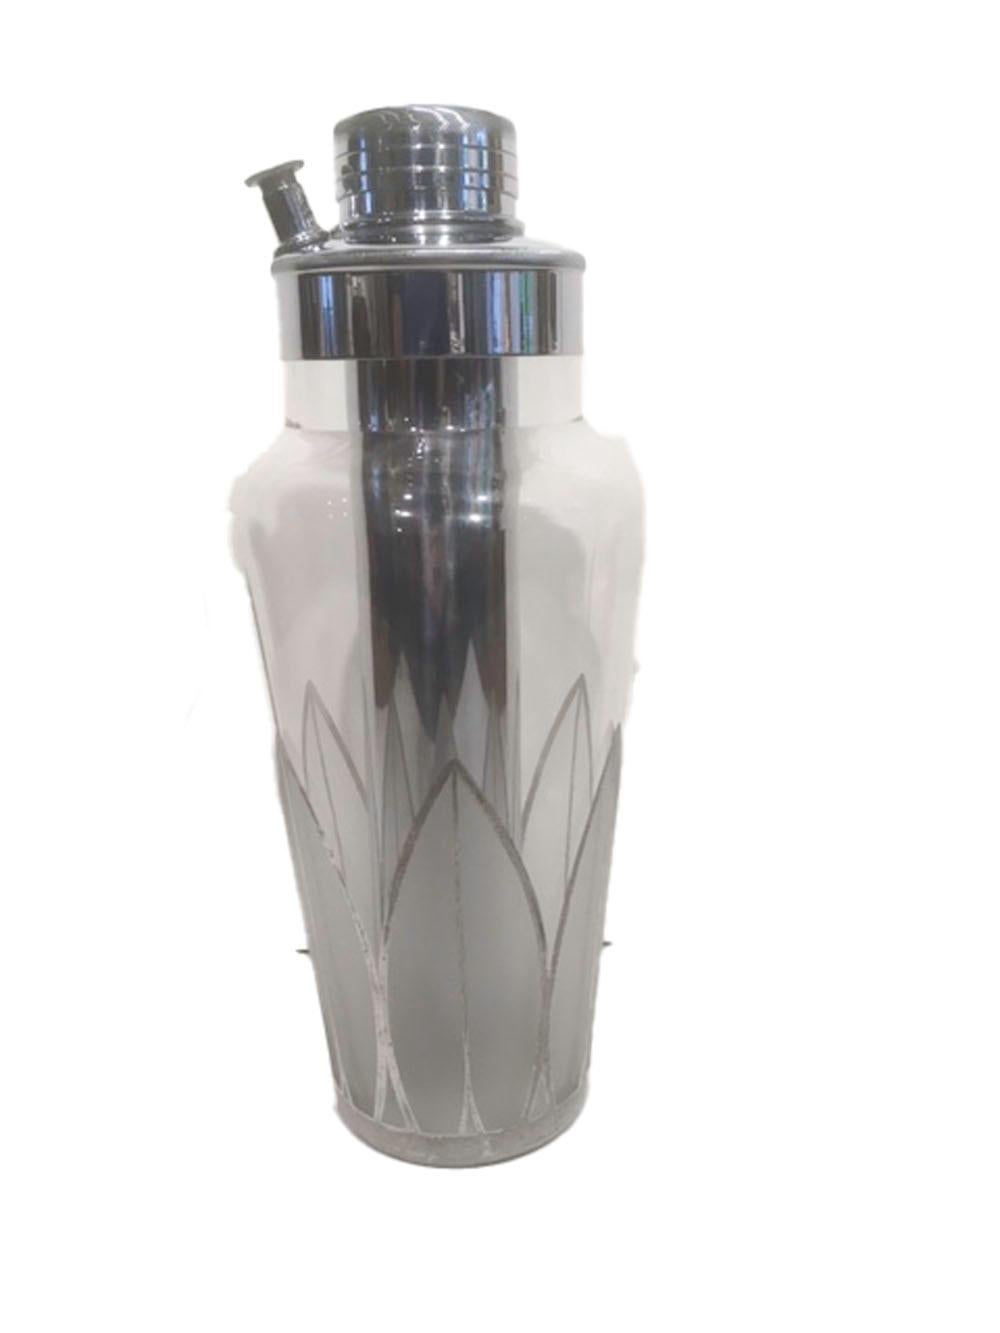 American Art Deco Cocktail Shaker with Silver Overlay and Frosted Palmette Design